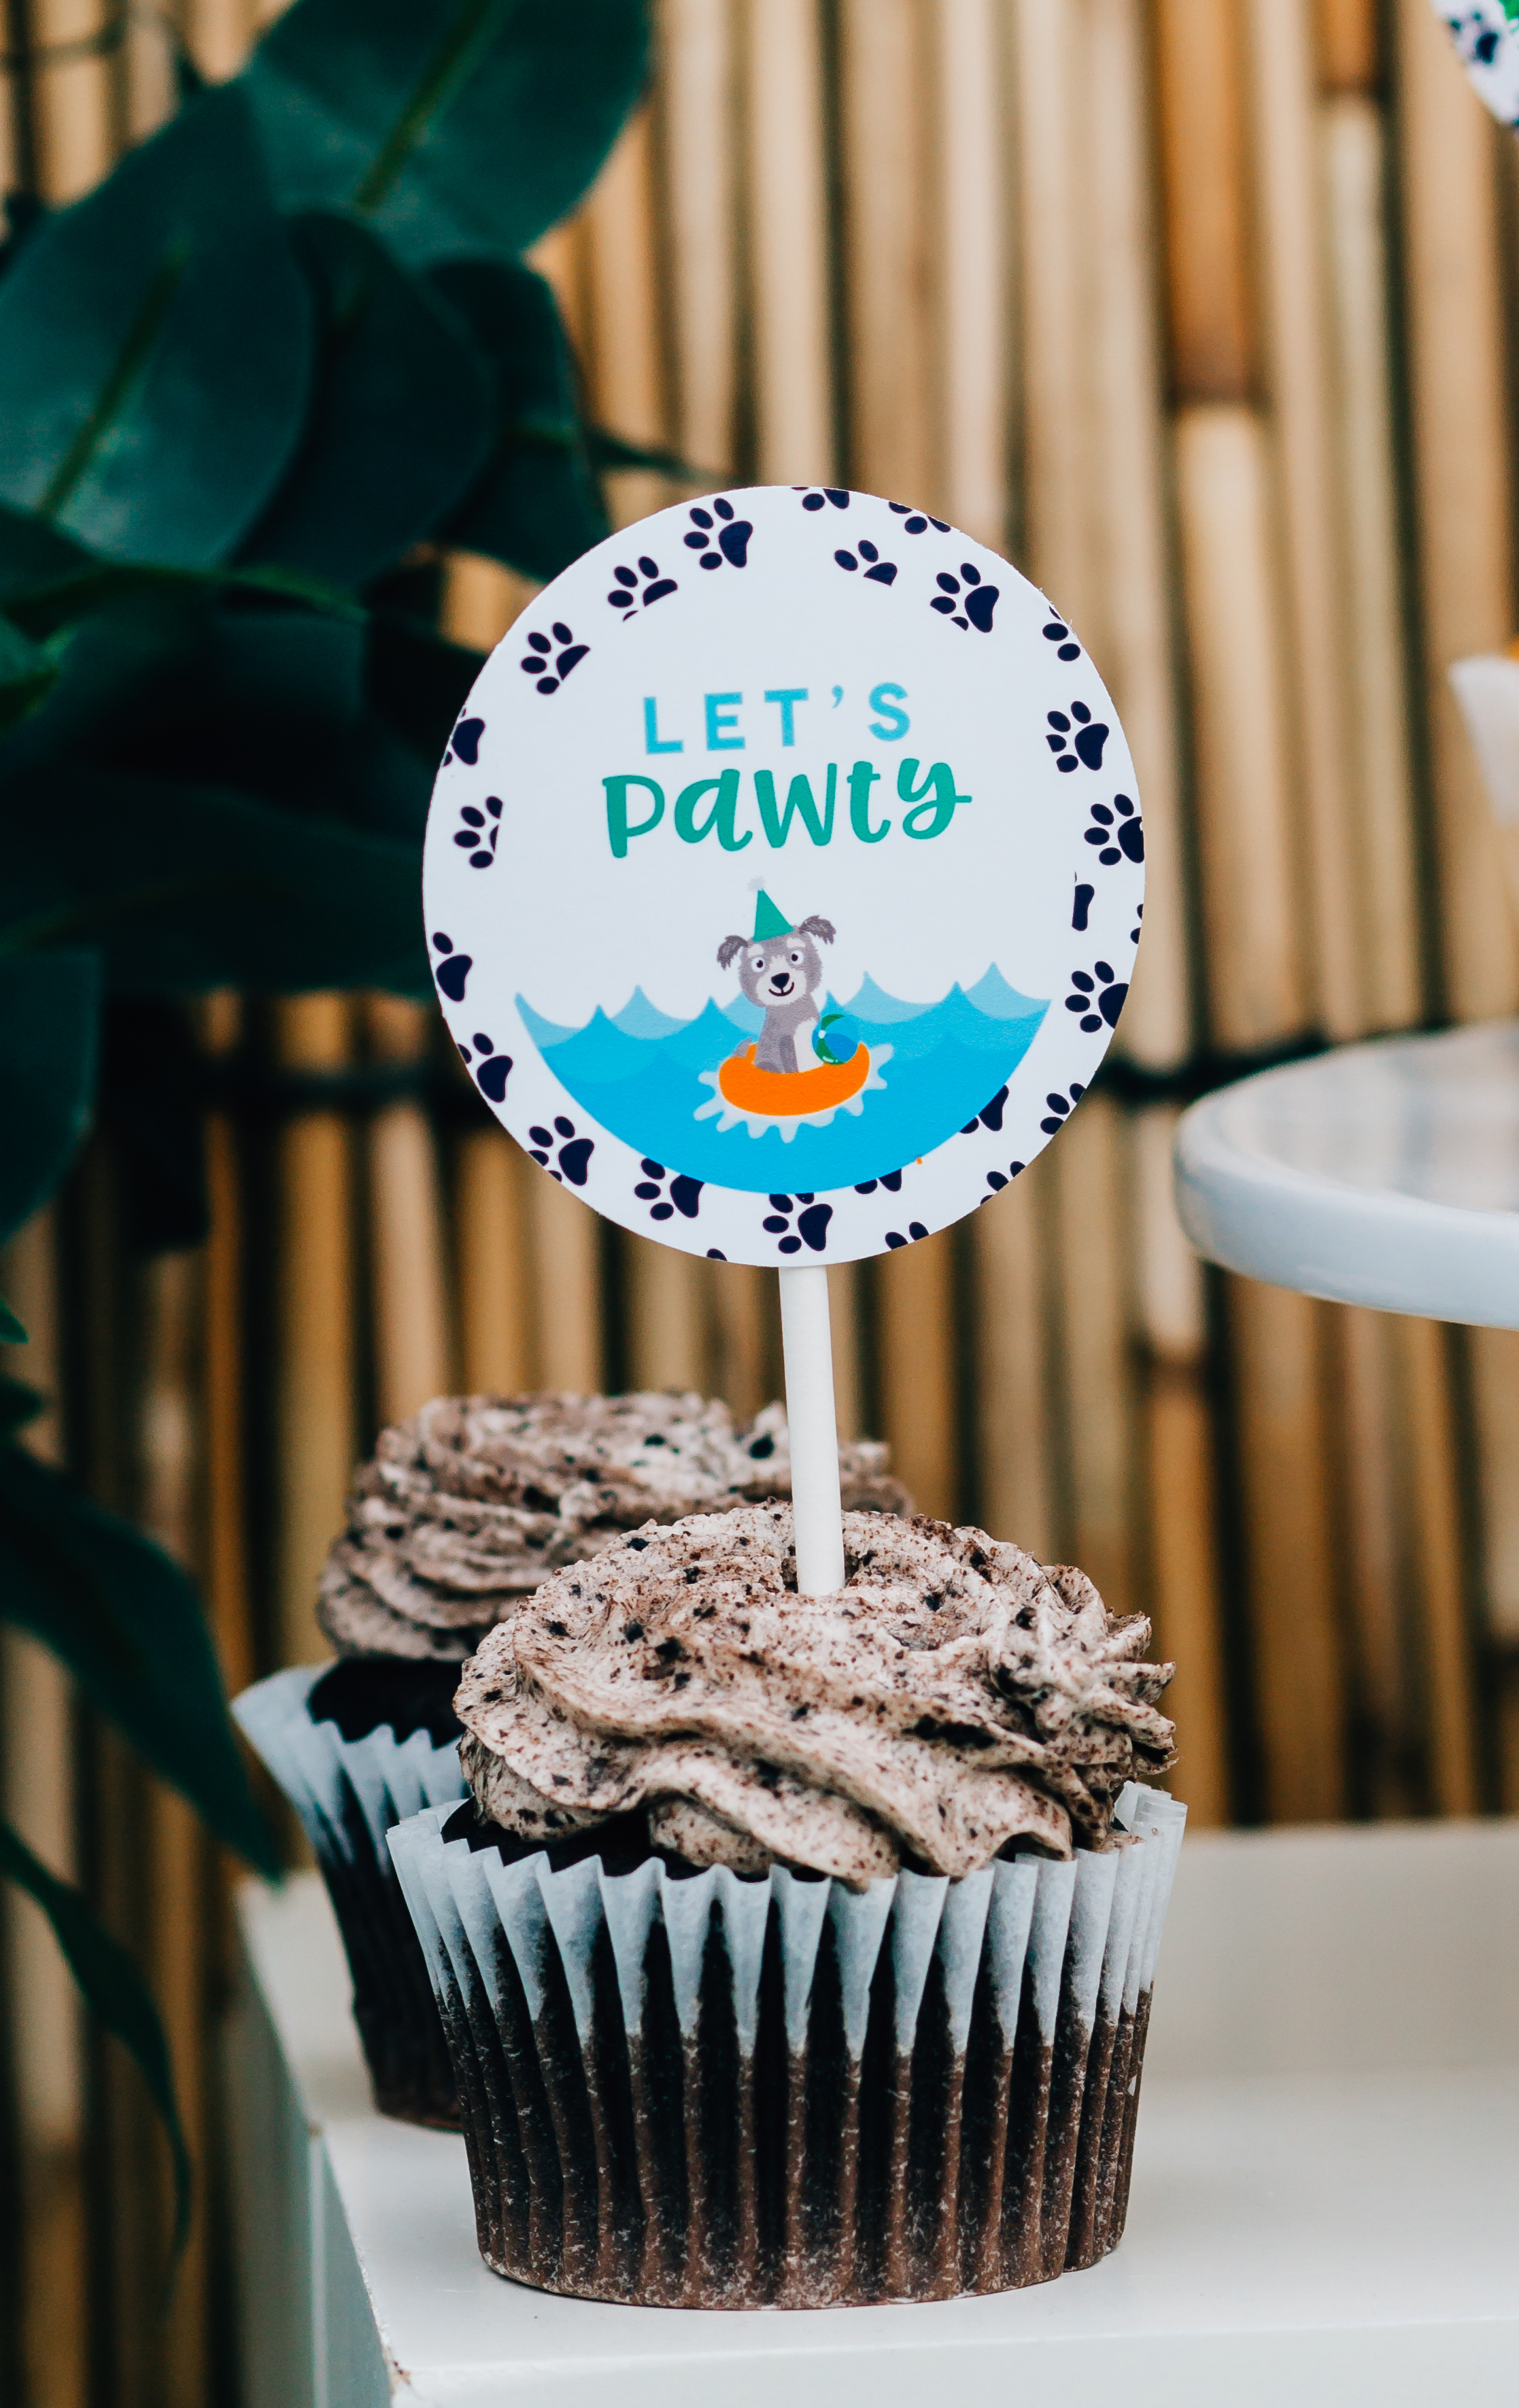 Let's Pawty at a tropical puppy party. Designs from MKKM Designs